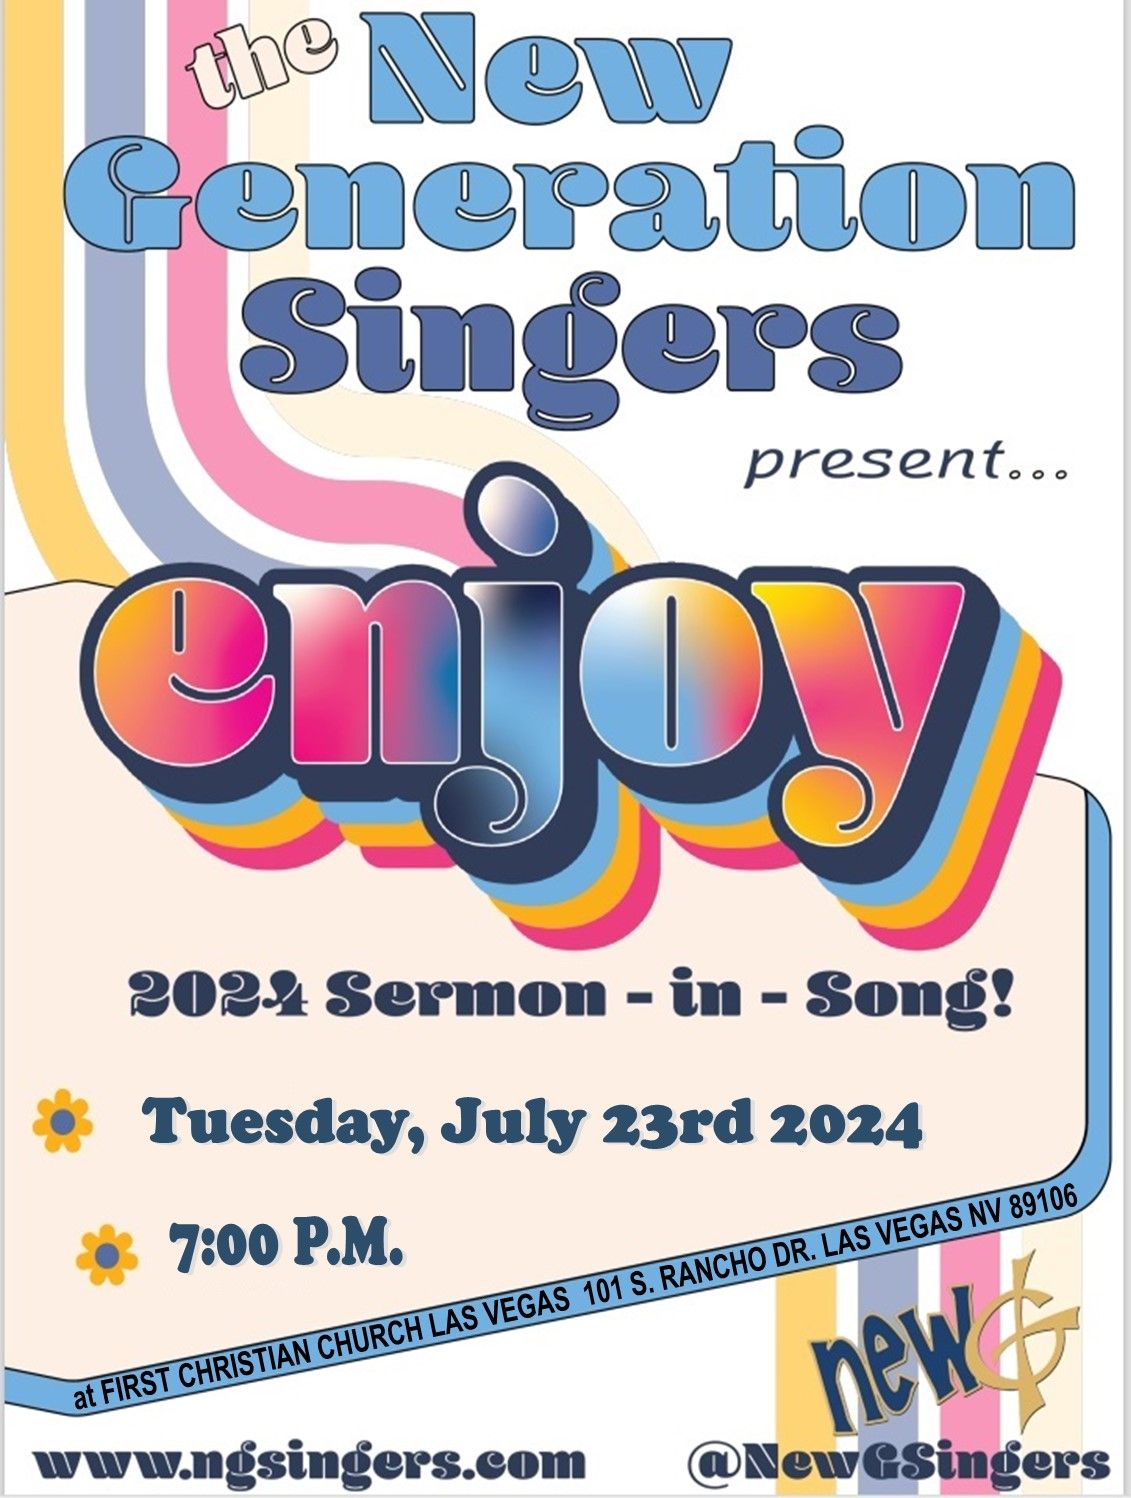 The New Generation Singers - ENJOY: 2024 Sermon in Song